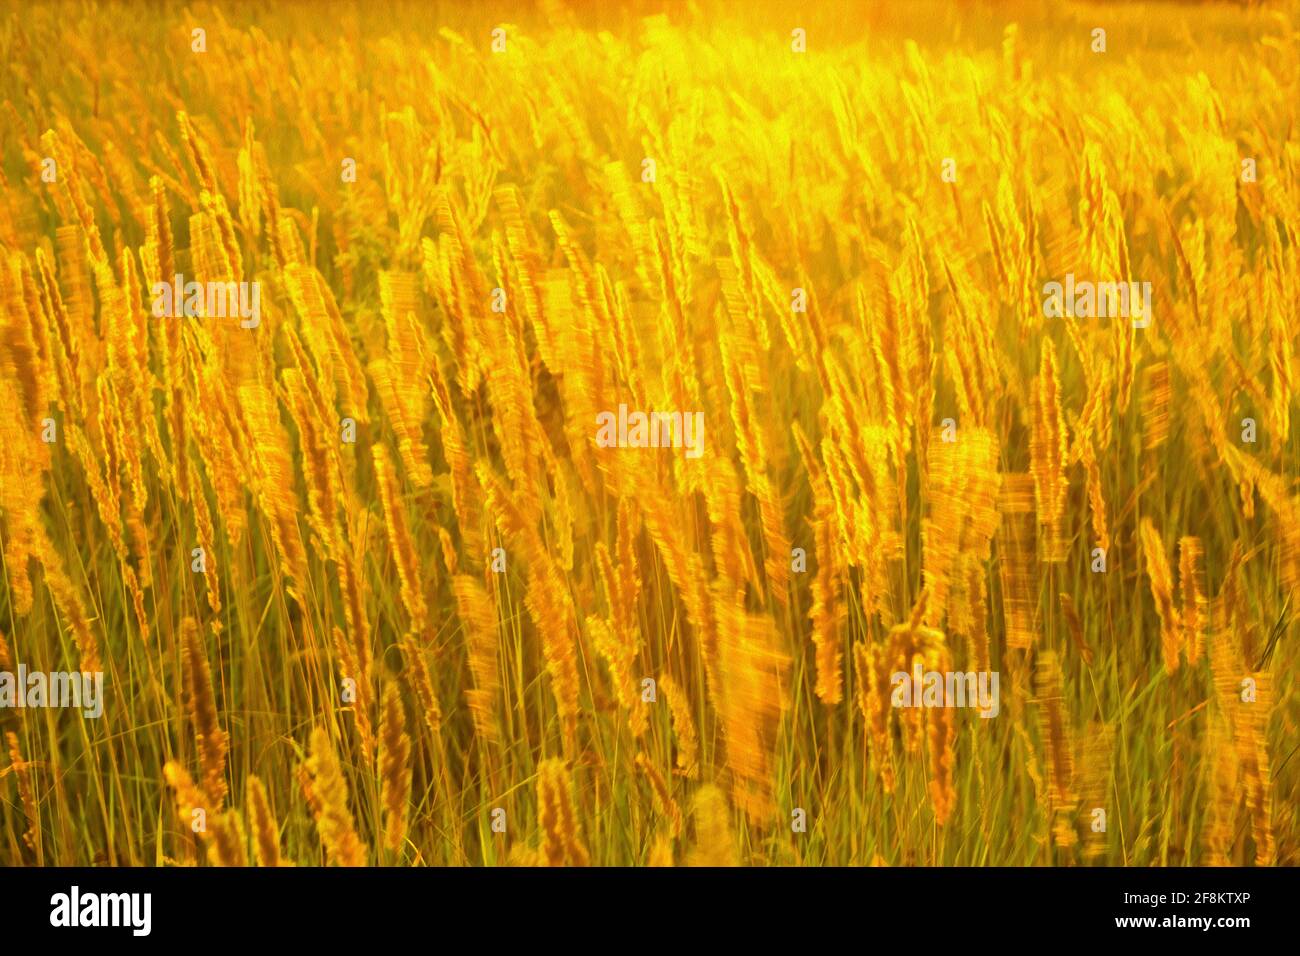 High meadow grass in the bright setting sun backlighting as a artistic textured illustration Stock Photo